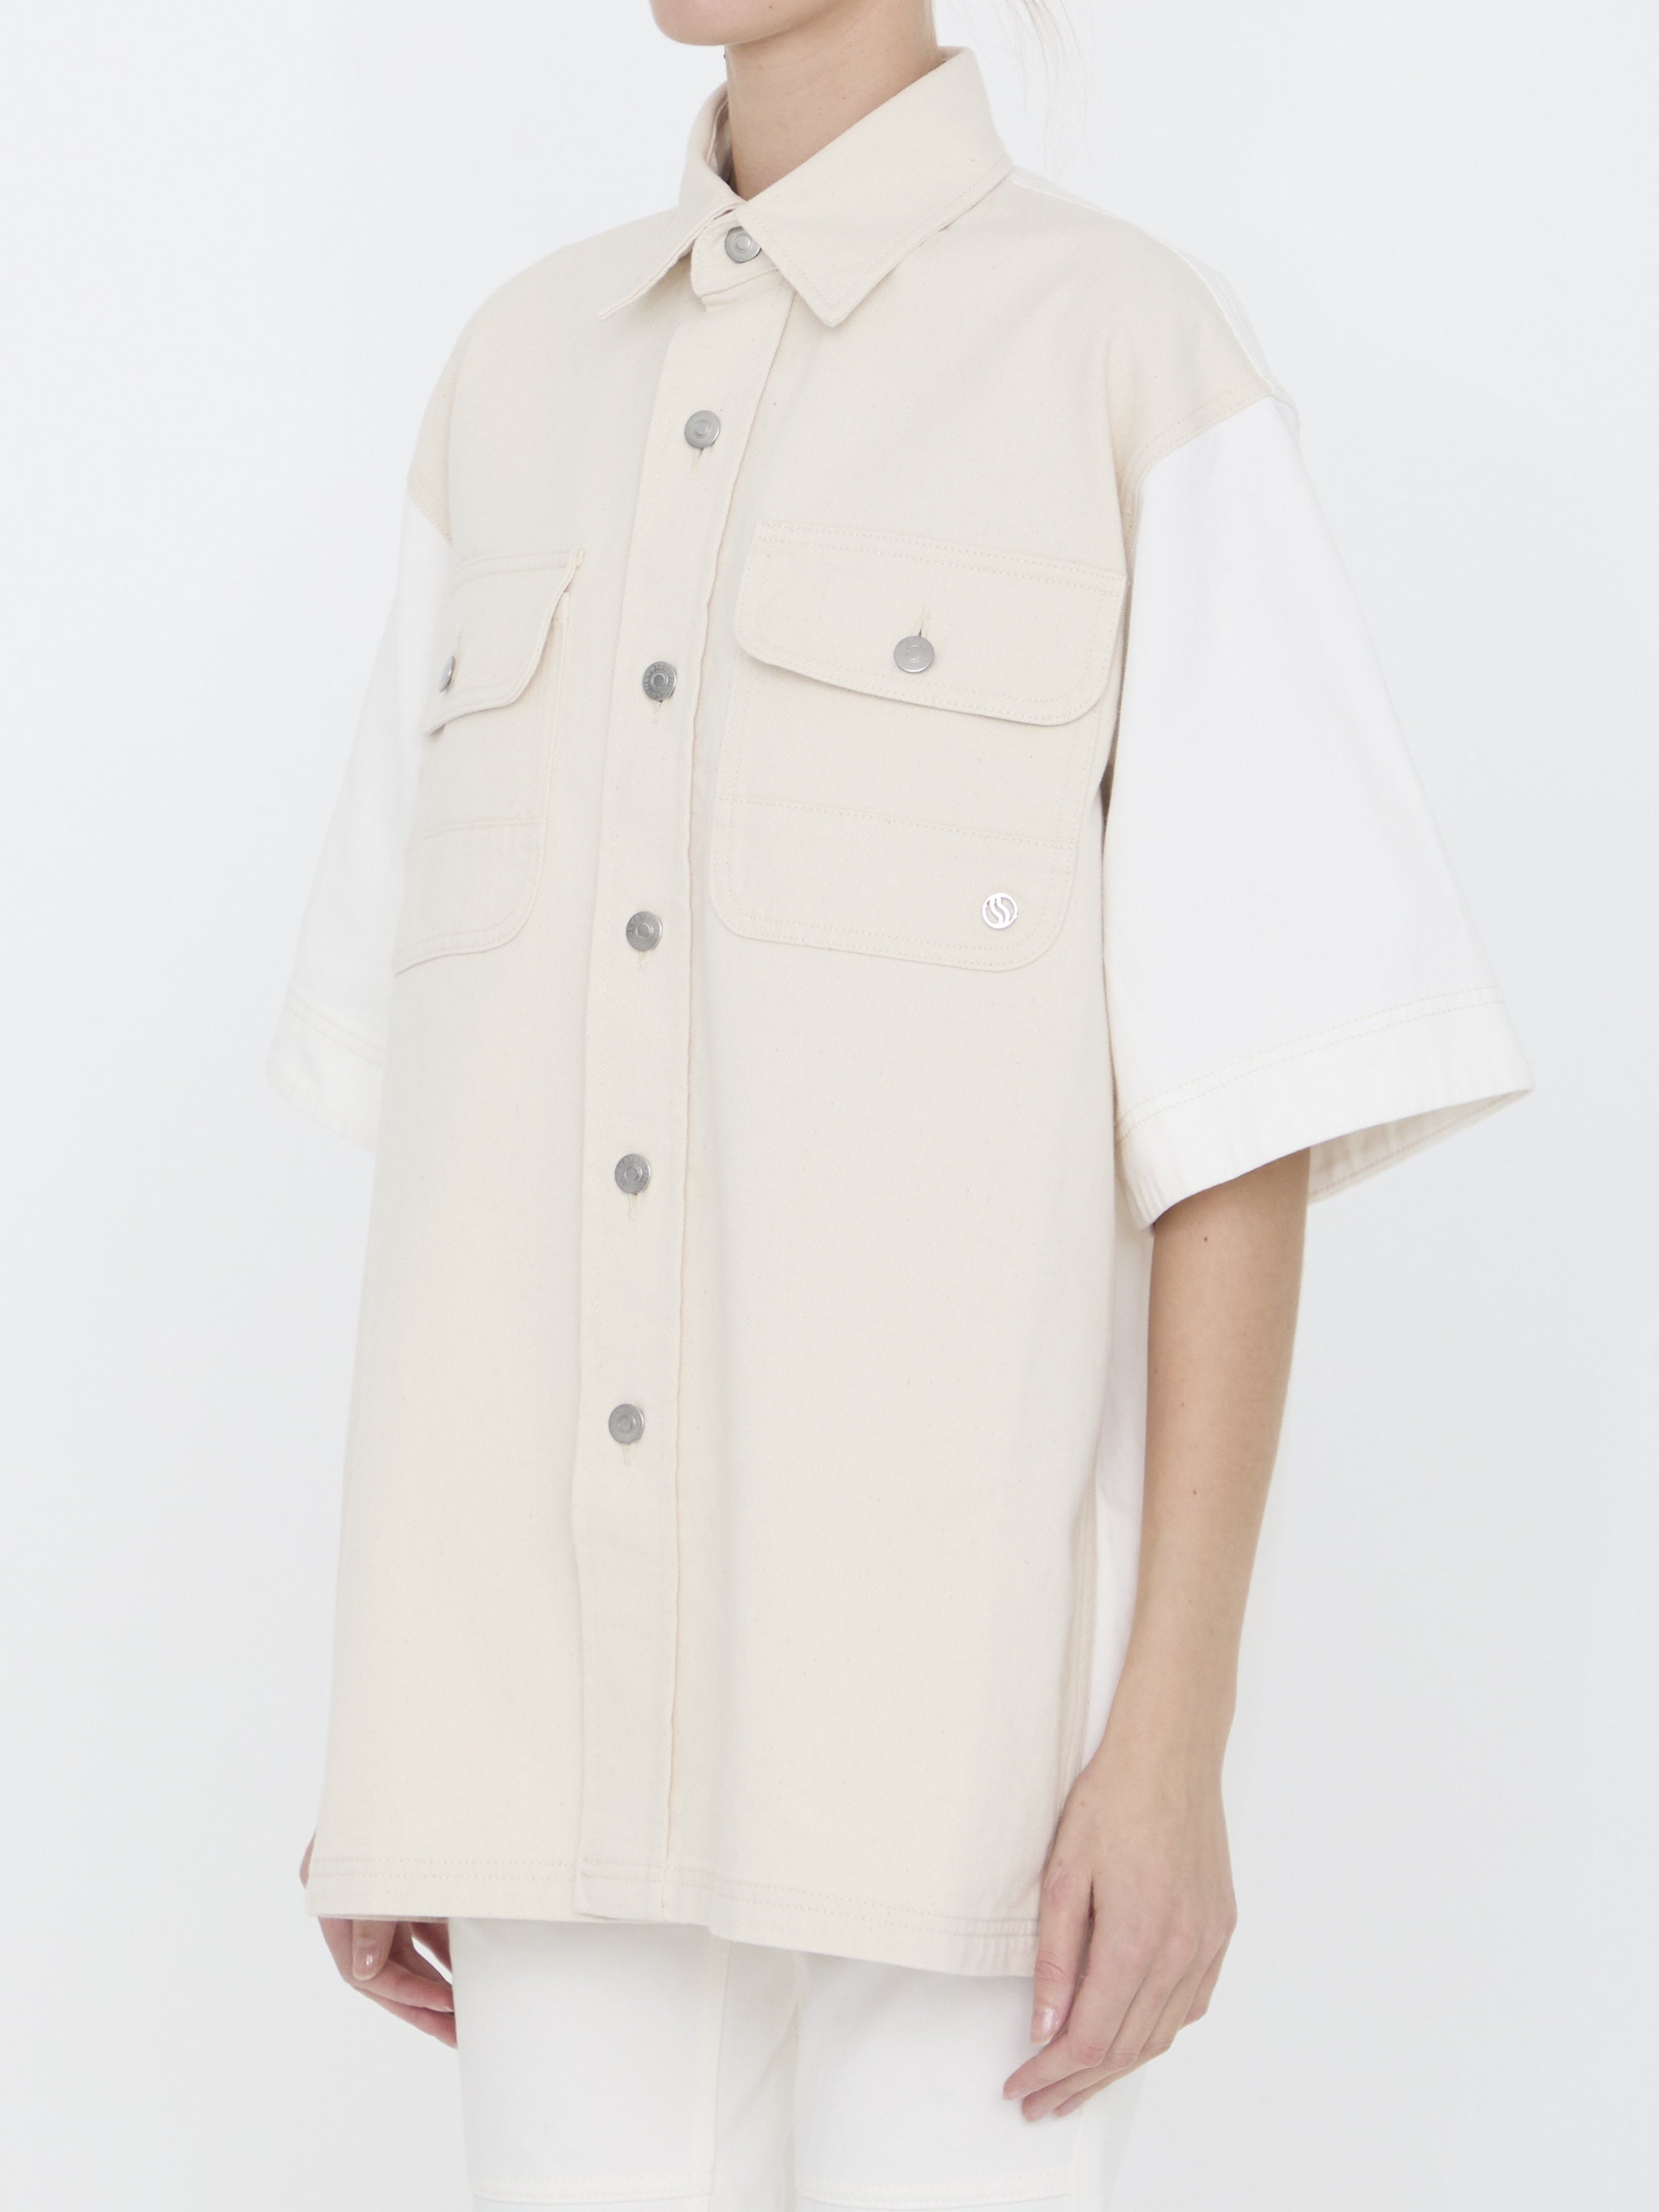 STELLA-MCCARTNEY-OUTLET-SALE-Workwear-shirt-Shirts-ARCHIVE-COLLECTION-2.jpg